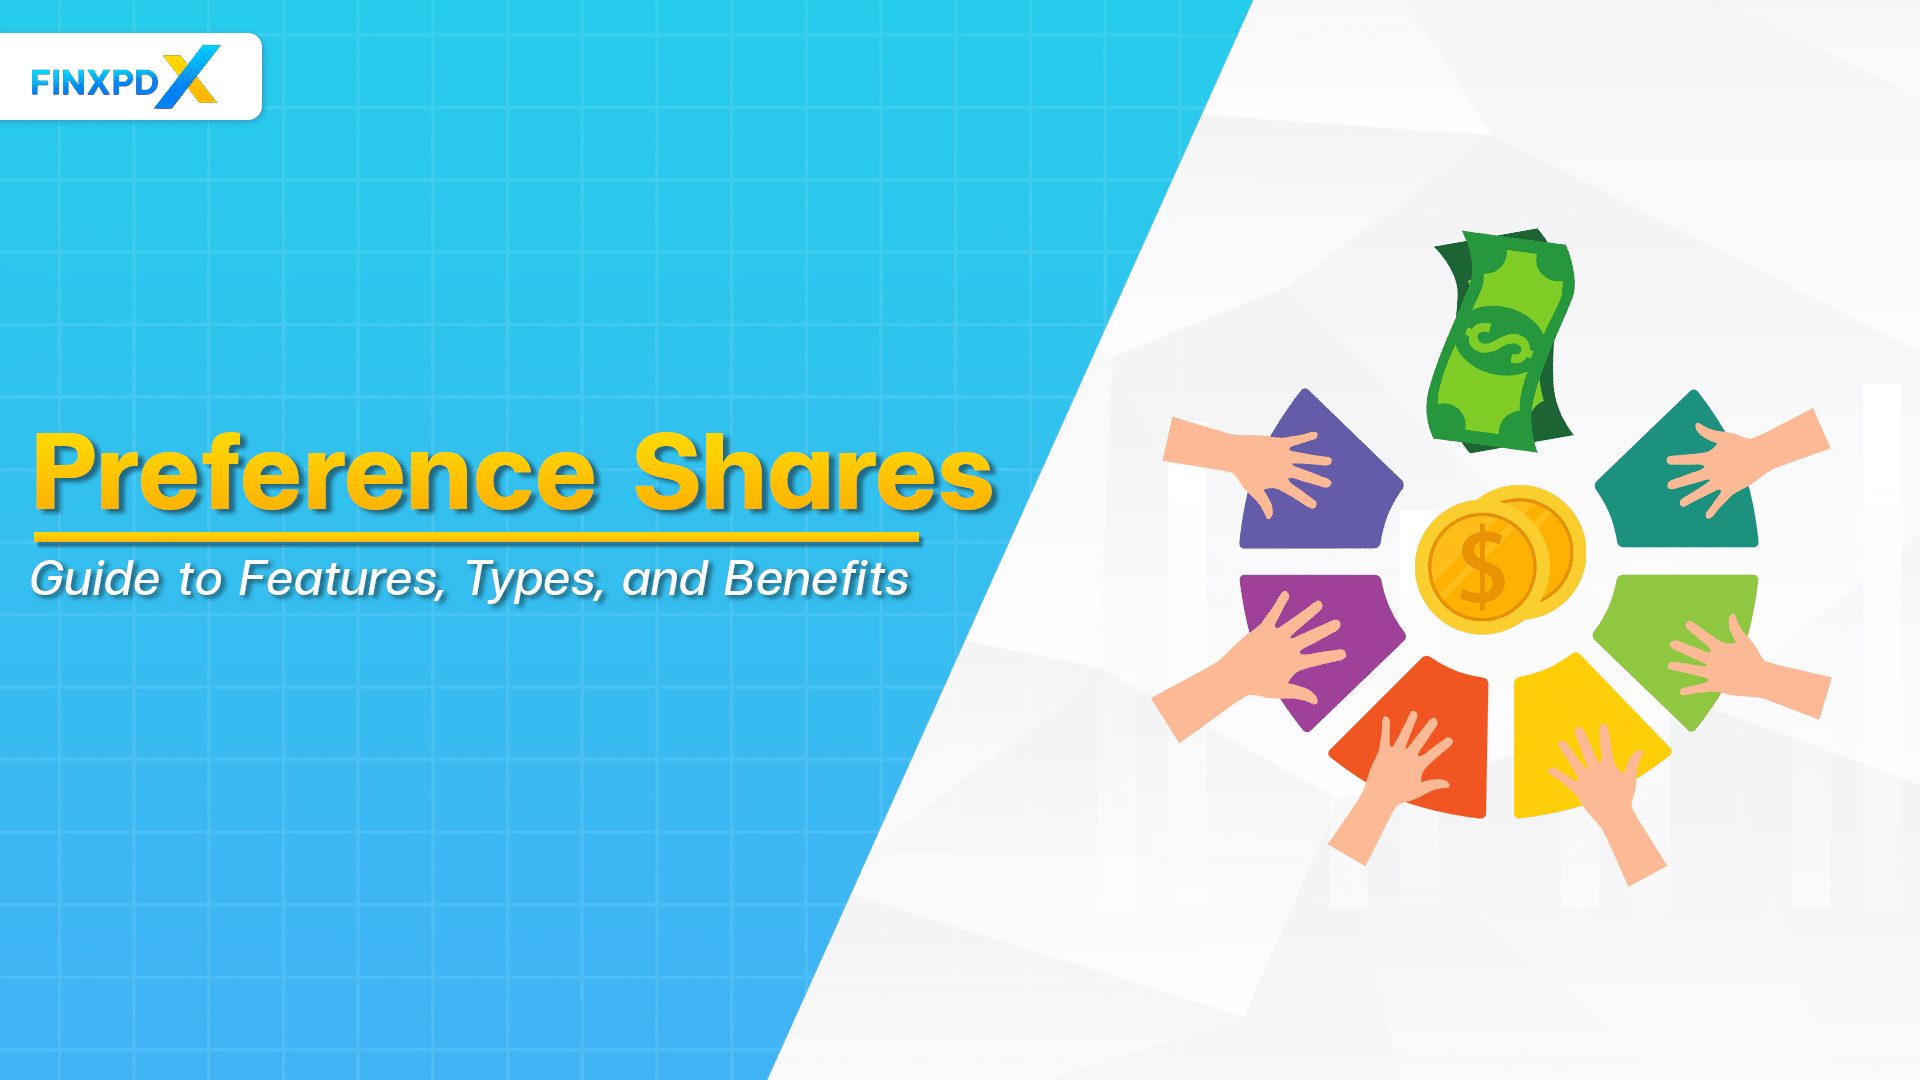 Preference Shares: Guide to Features, Types, and Benefits